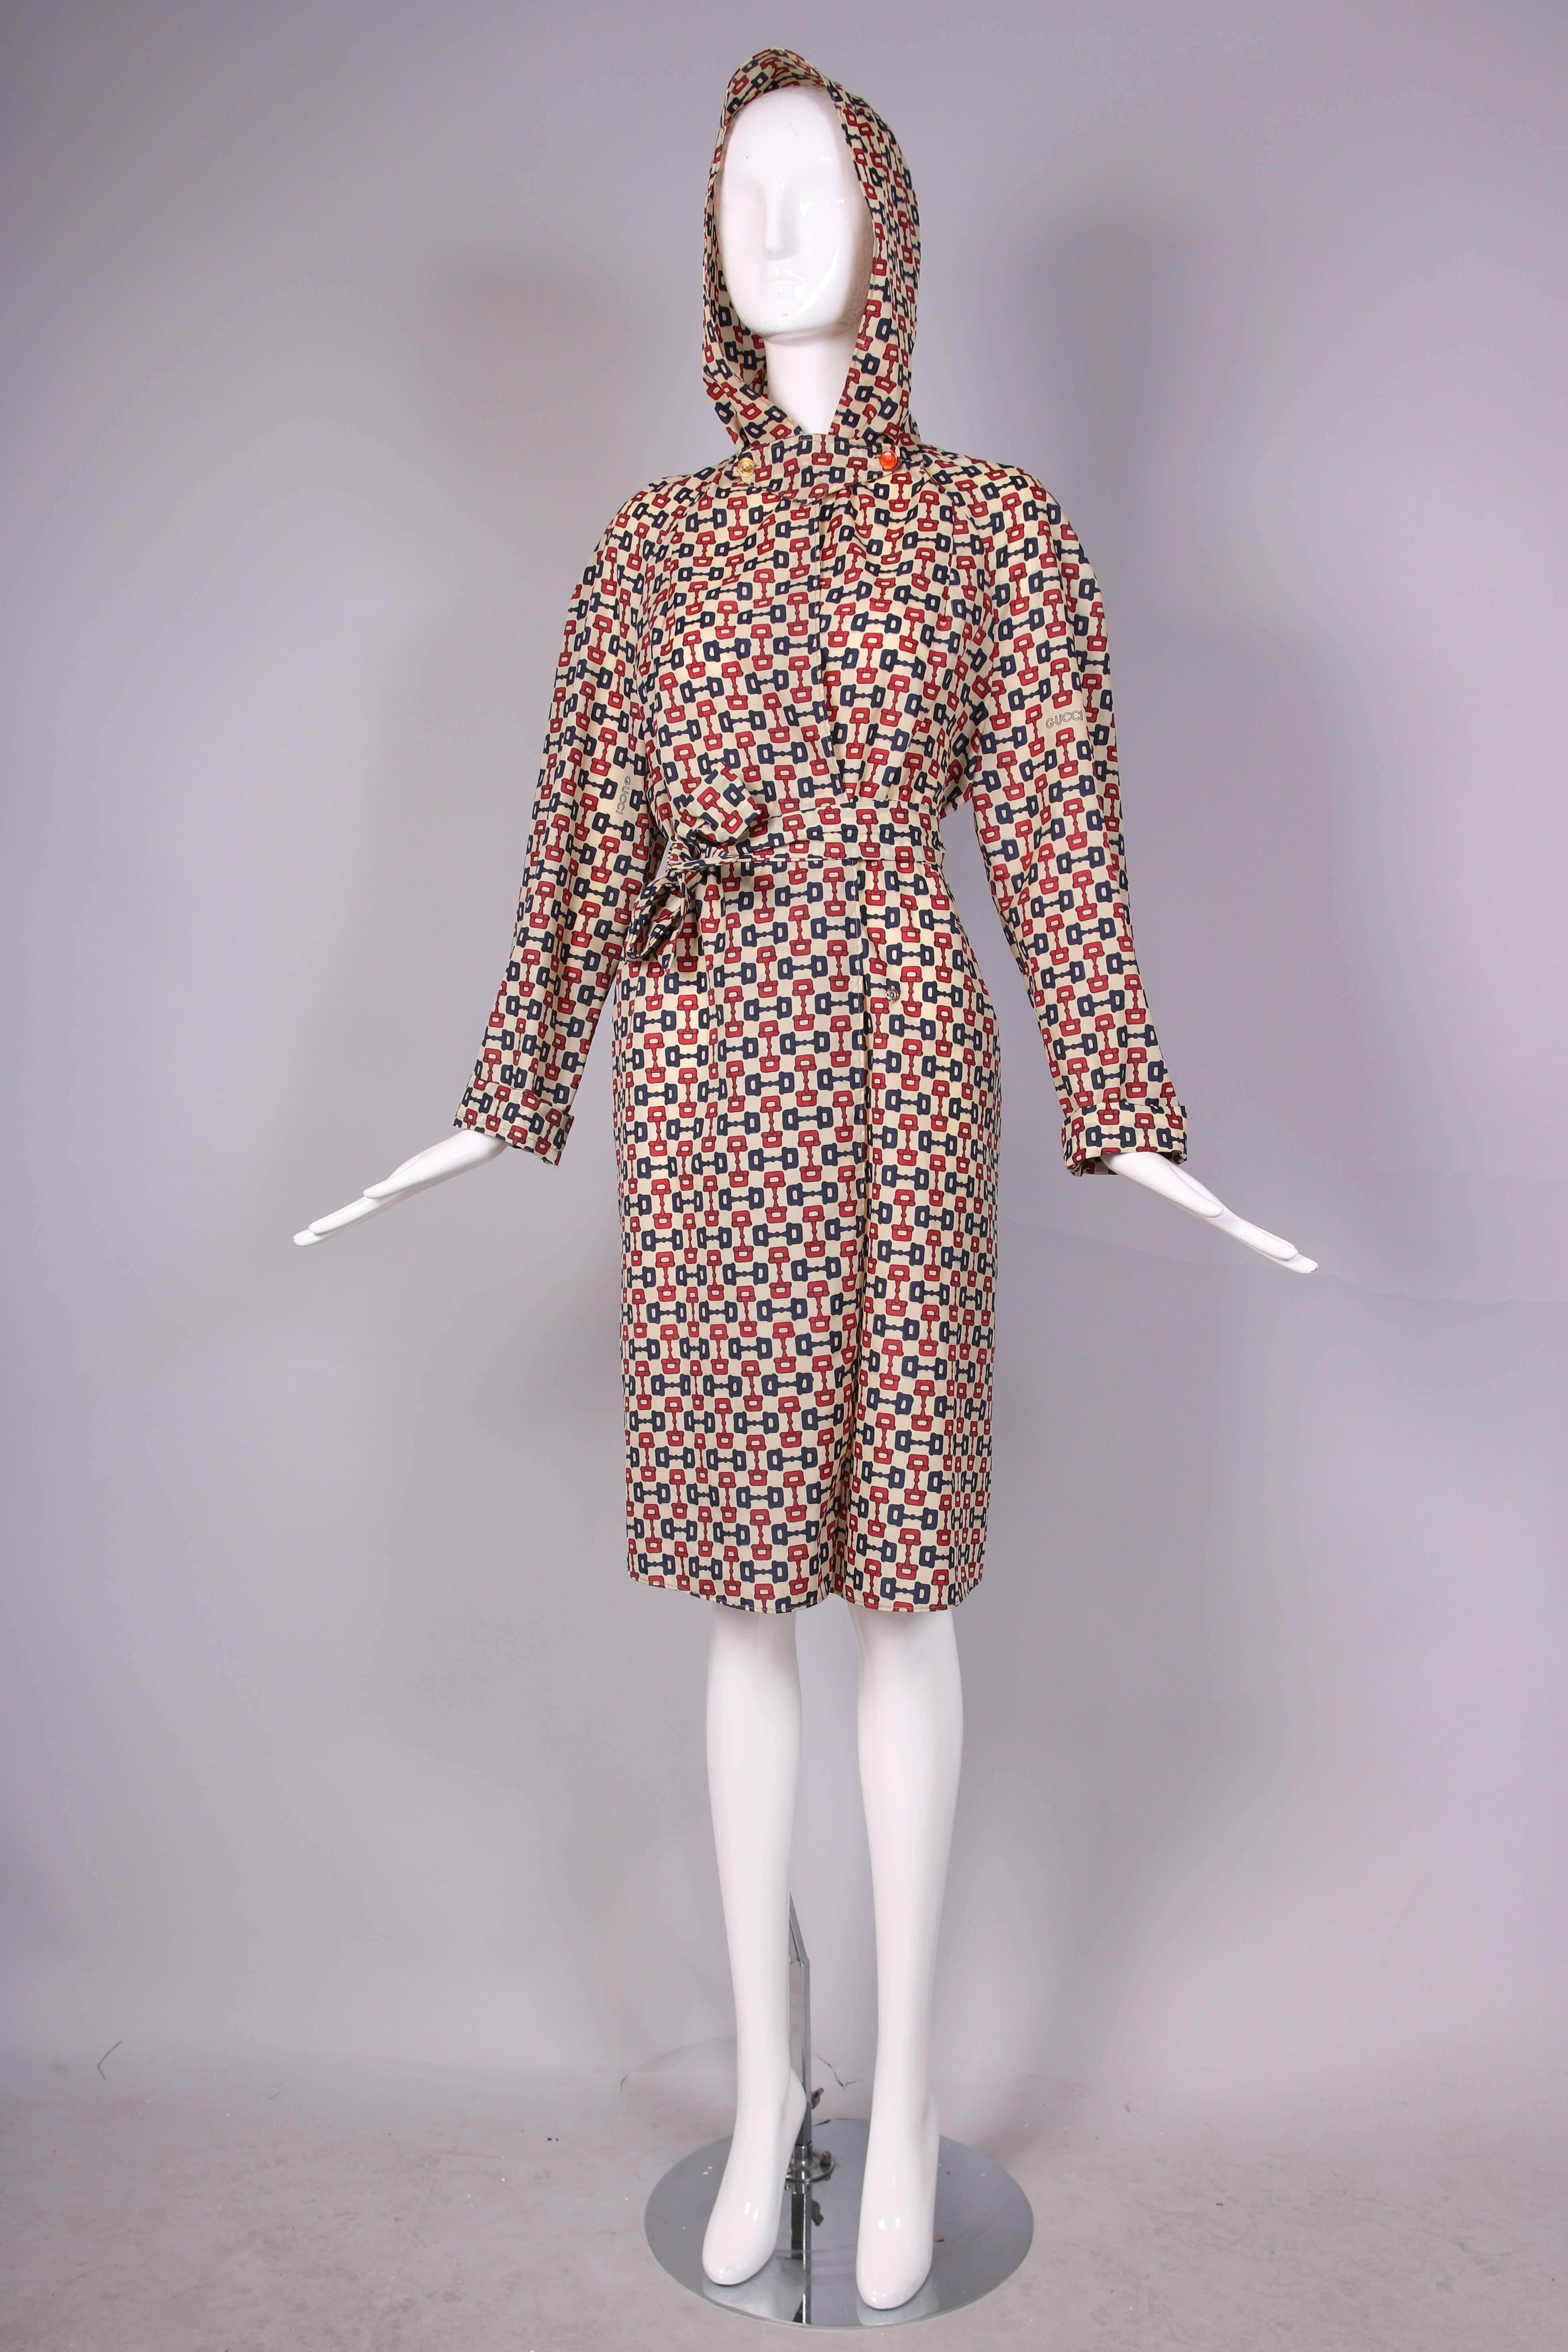 1970's Gucci iconic horsebit print hooded raincoat w/belt. Gucci logo included in print in three places. Snap closure. Two glazed Gucci buttons at neck - one button is missing glaze. Comes with pouch - raincoat folds up and fits inside - perfect for